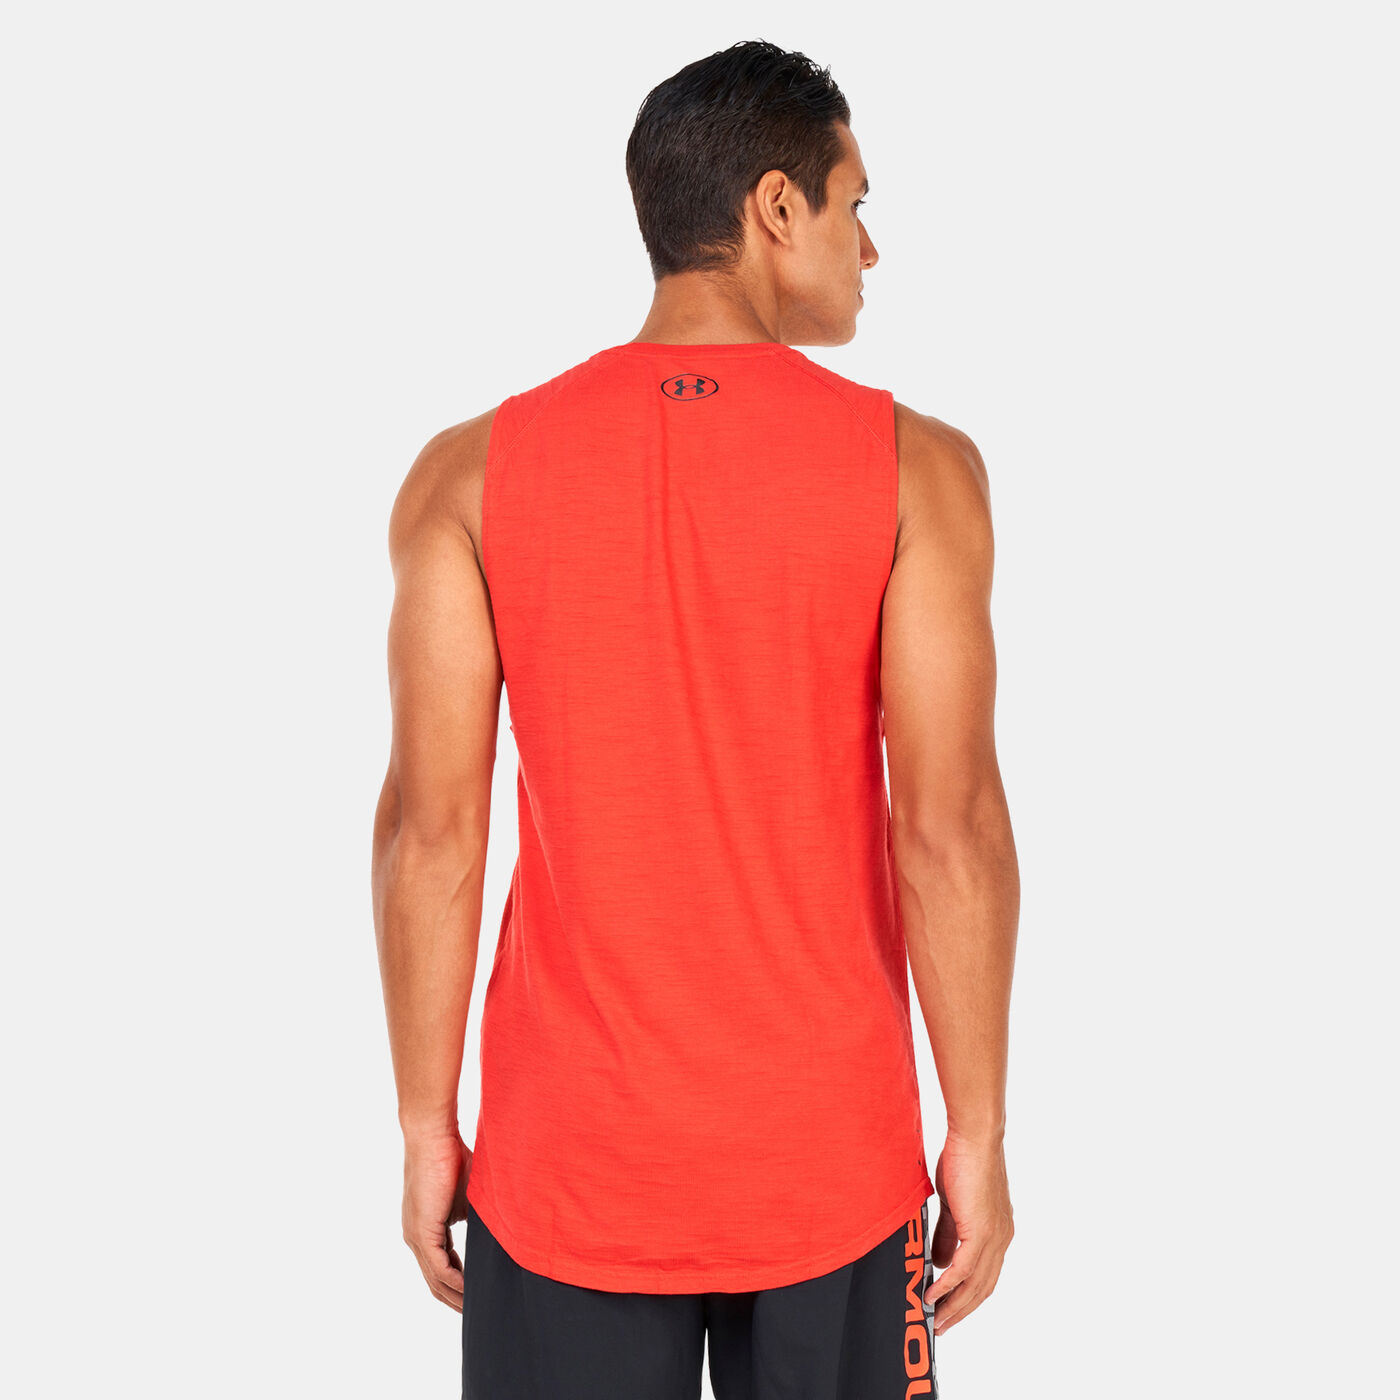 Men's Charged Cotton® Tank Top